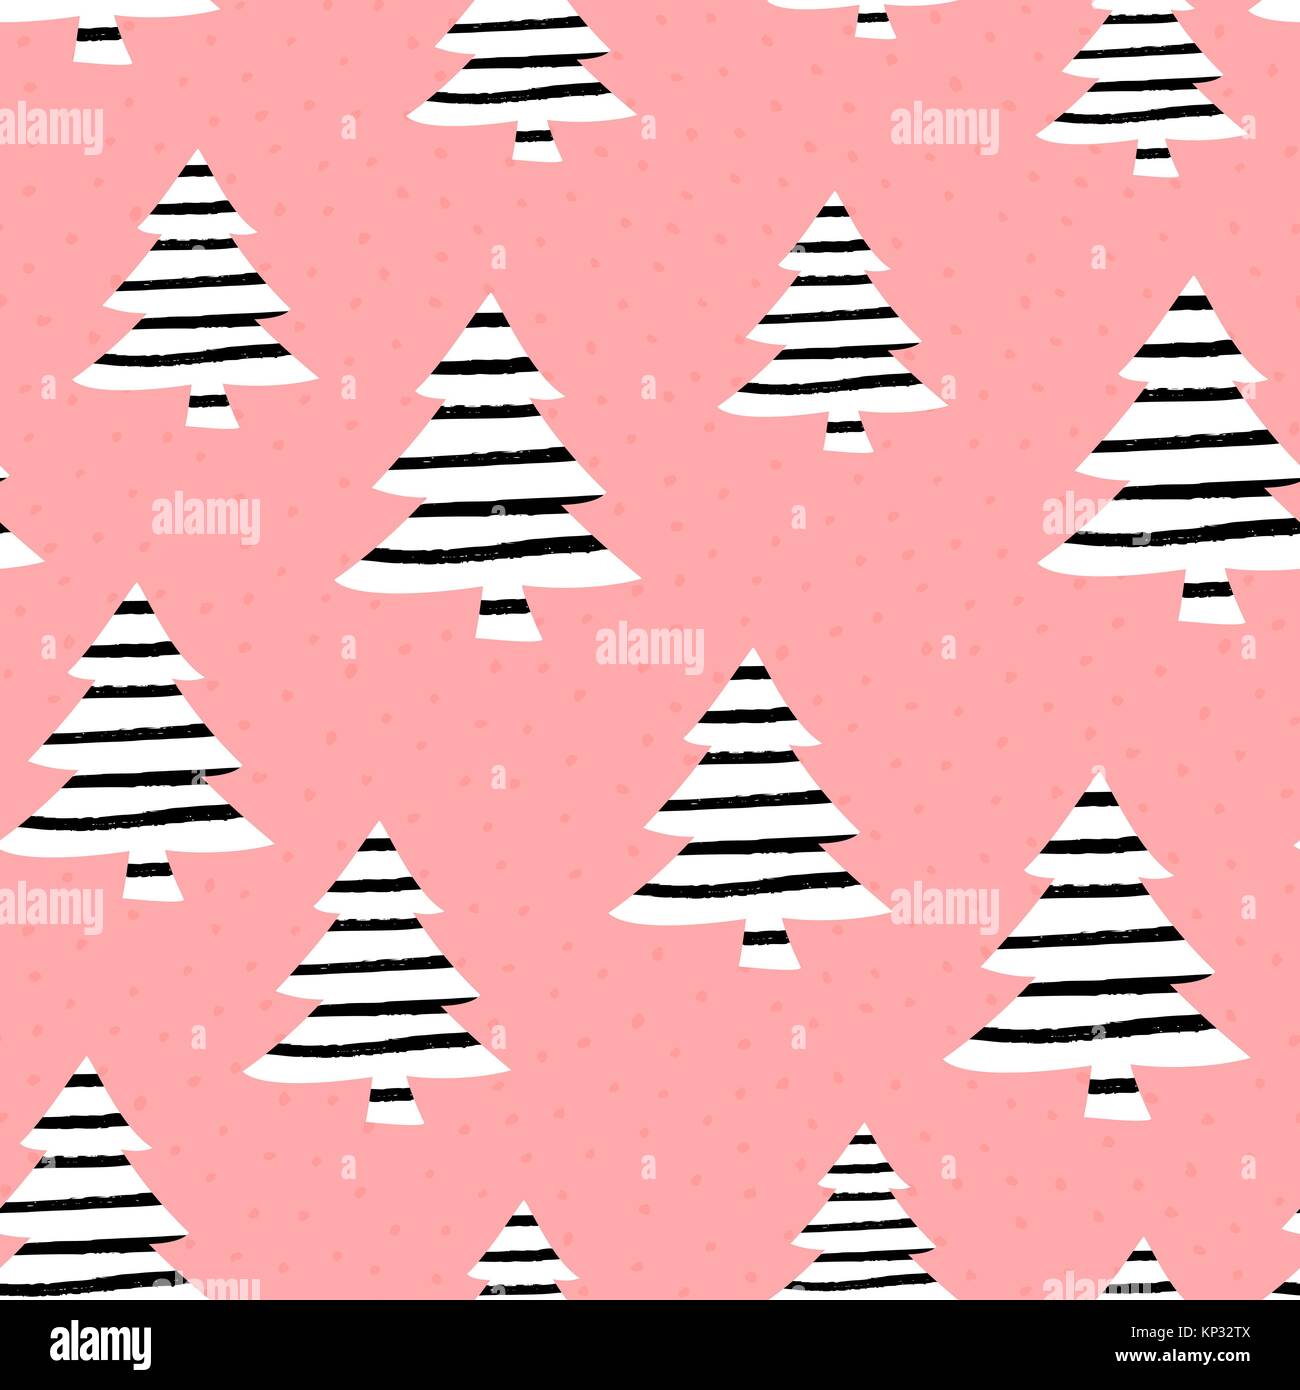 Cute Pink Christmas Wallpapers  Wallpaper Cave